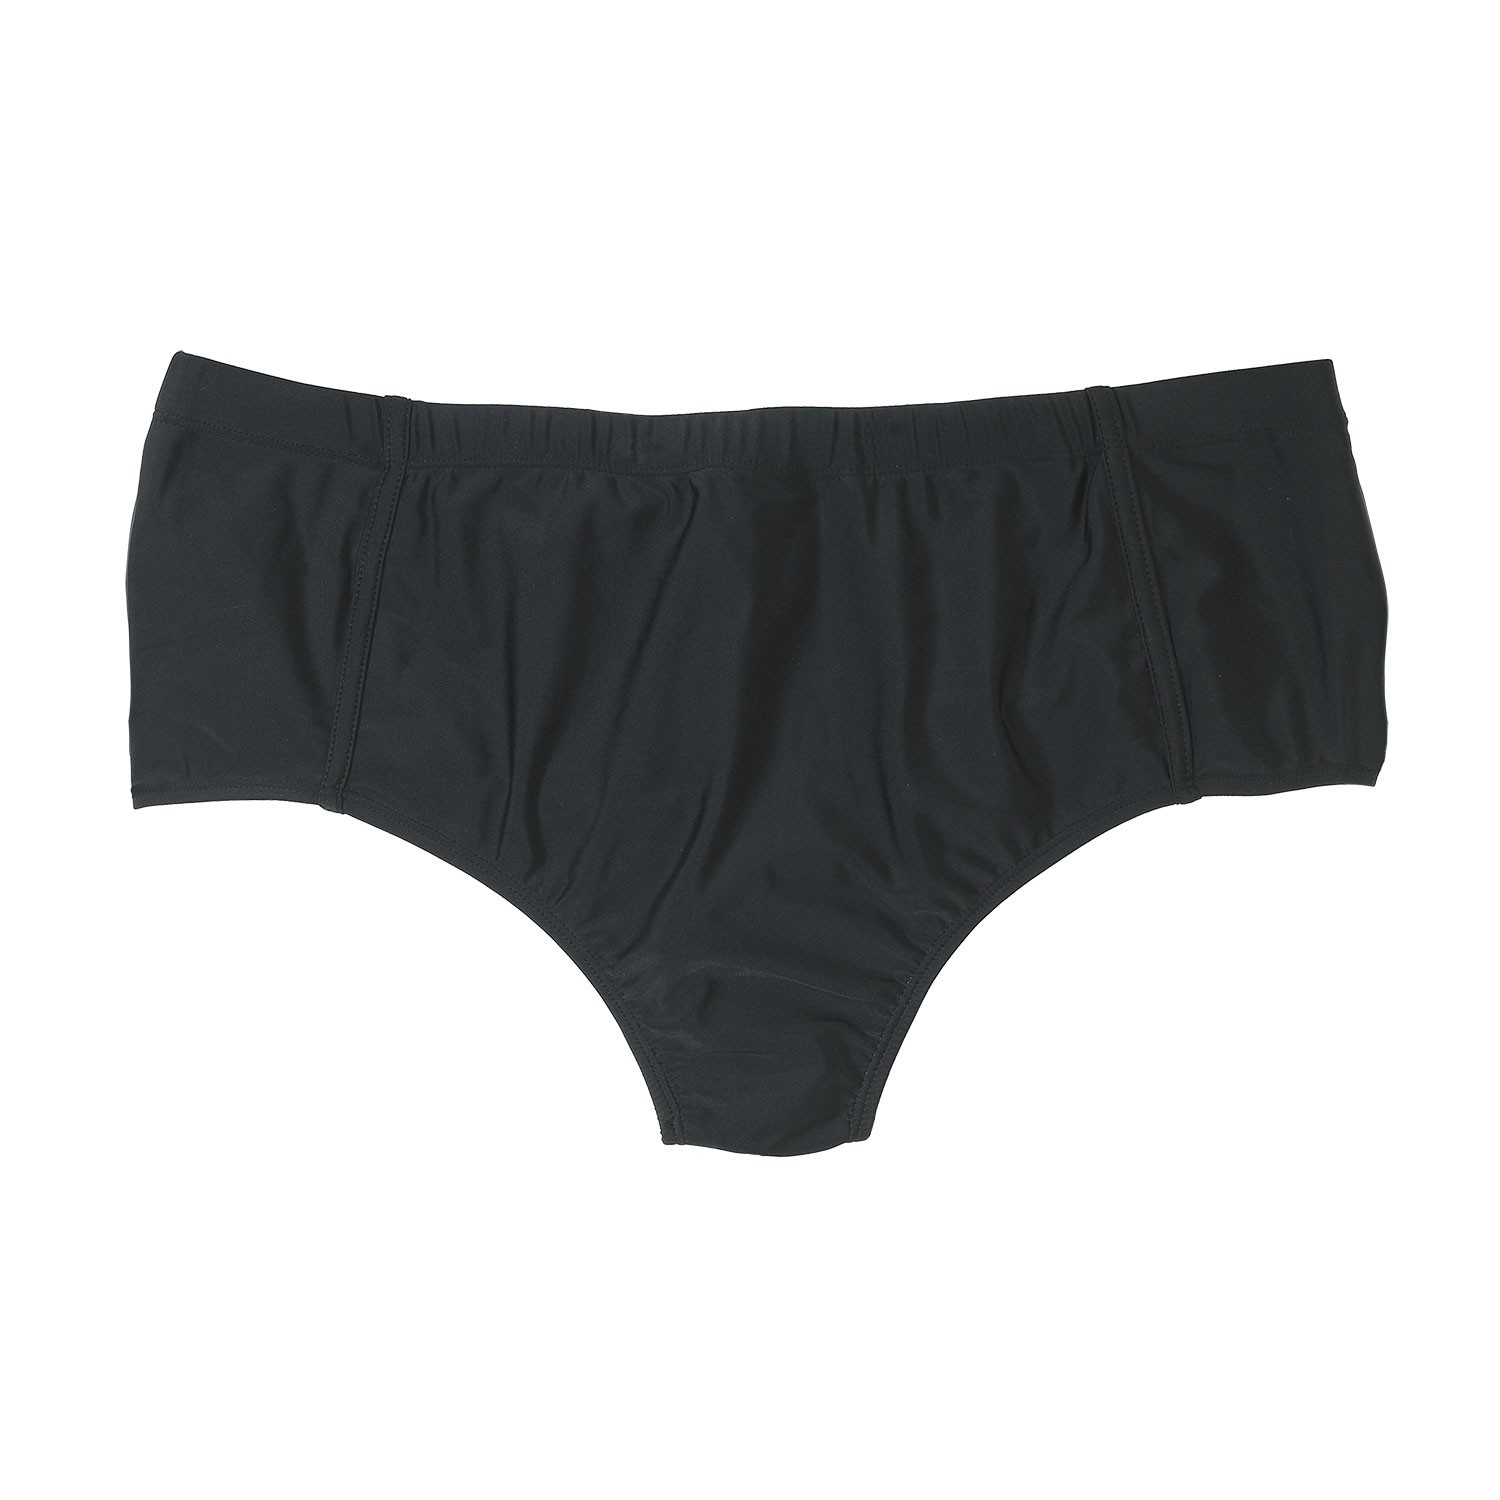 Swimming trunks in black by Abraxas in big sizes up to 8XL